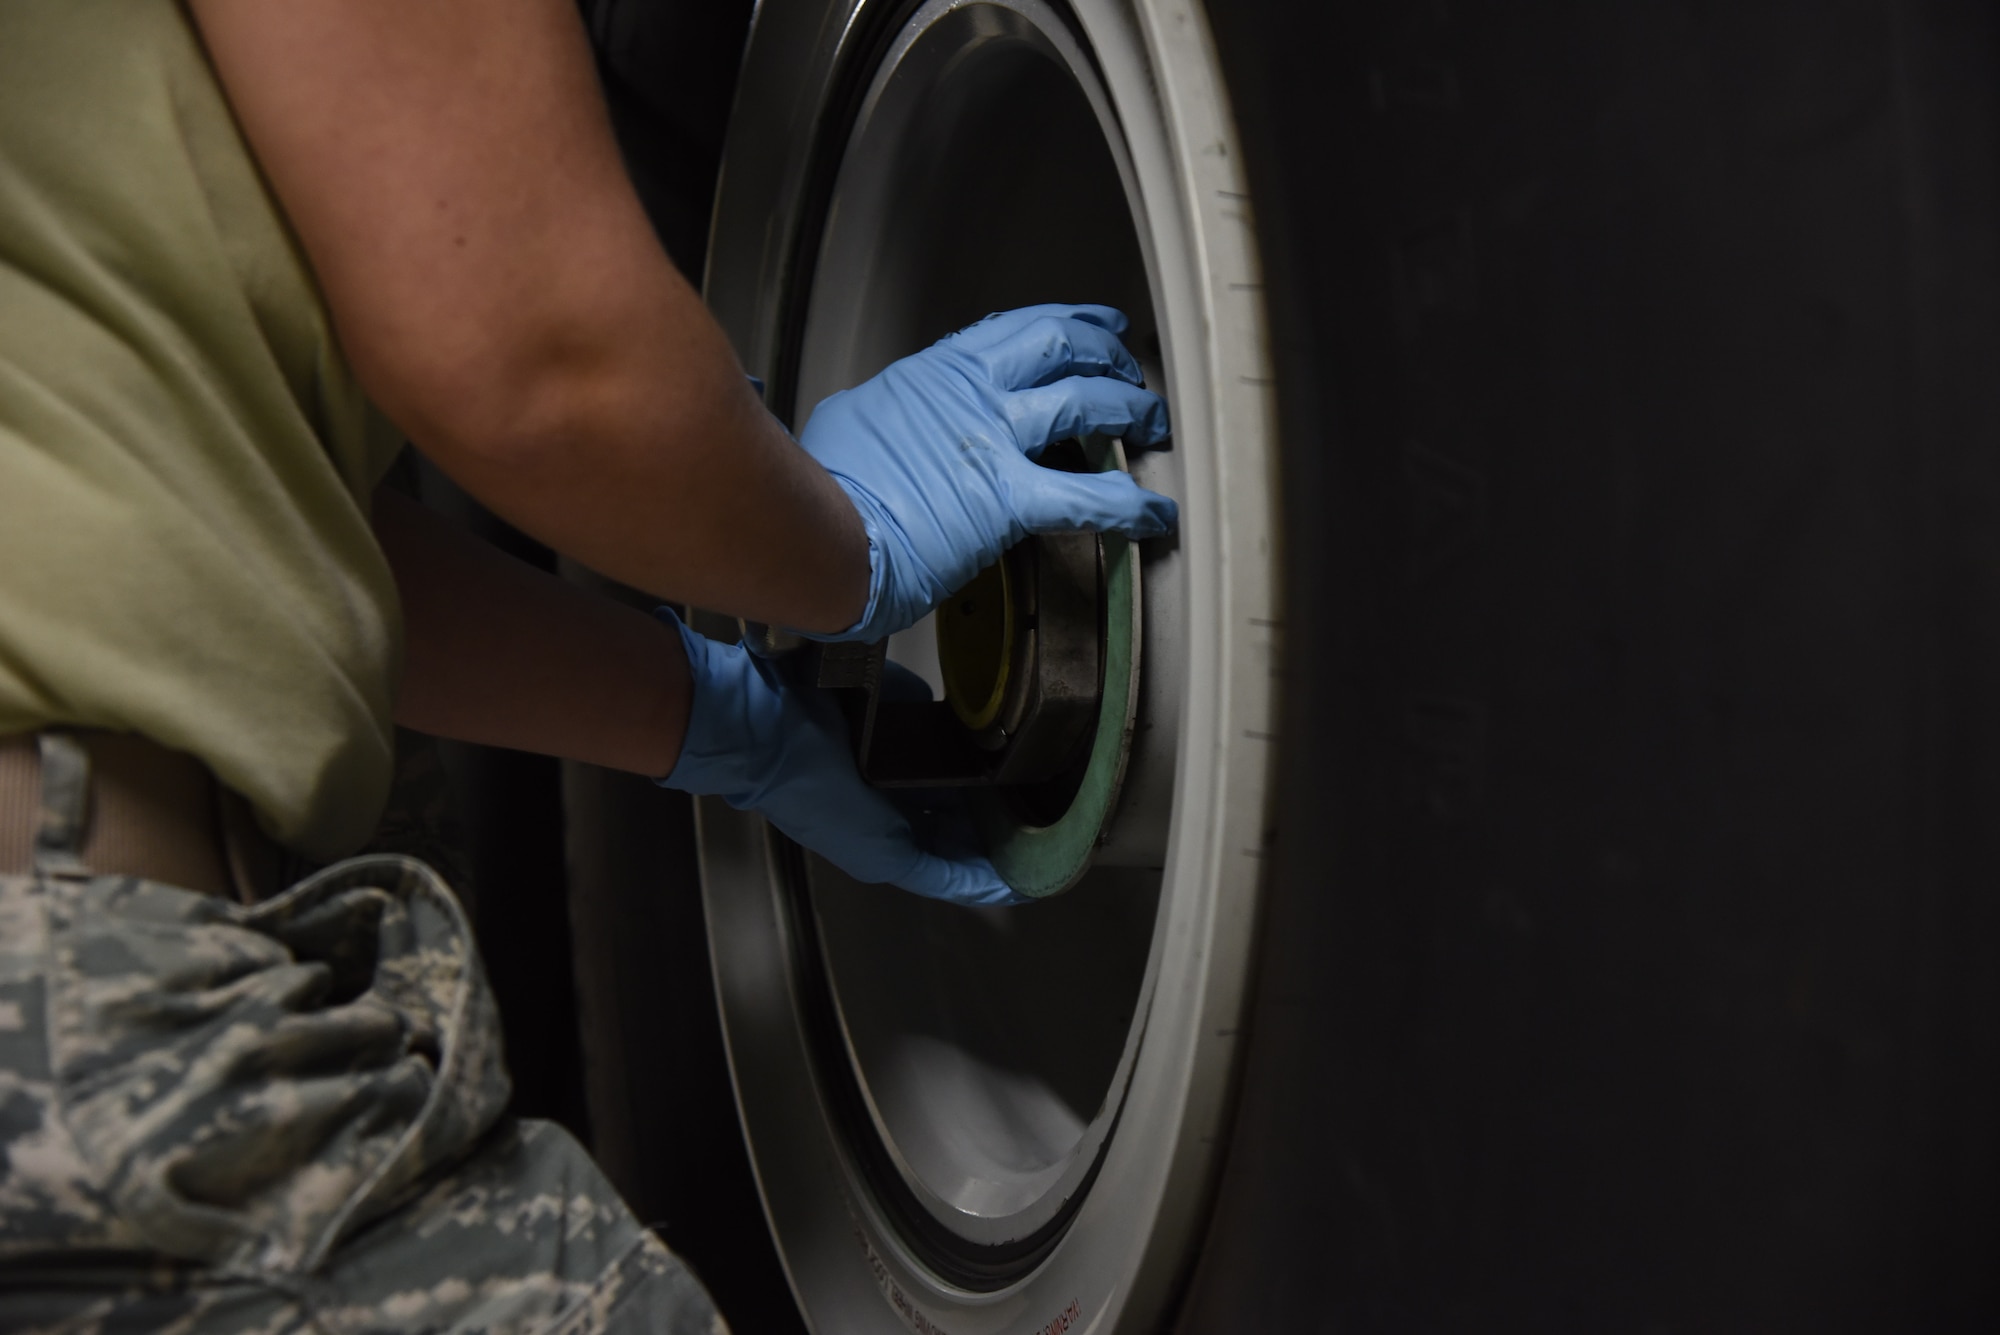 Senior Airman Landis Lee, 403rd Maintenance Squadron crew chief, prepares a tire for removal from a WC-130J  Jan. 13, 2019. This is a requirement that is performed during the routine inspections required to the maintain the aircraft's capabilities. (U.S. Air Force photo by Senior Airman Kristen Pittman)